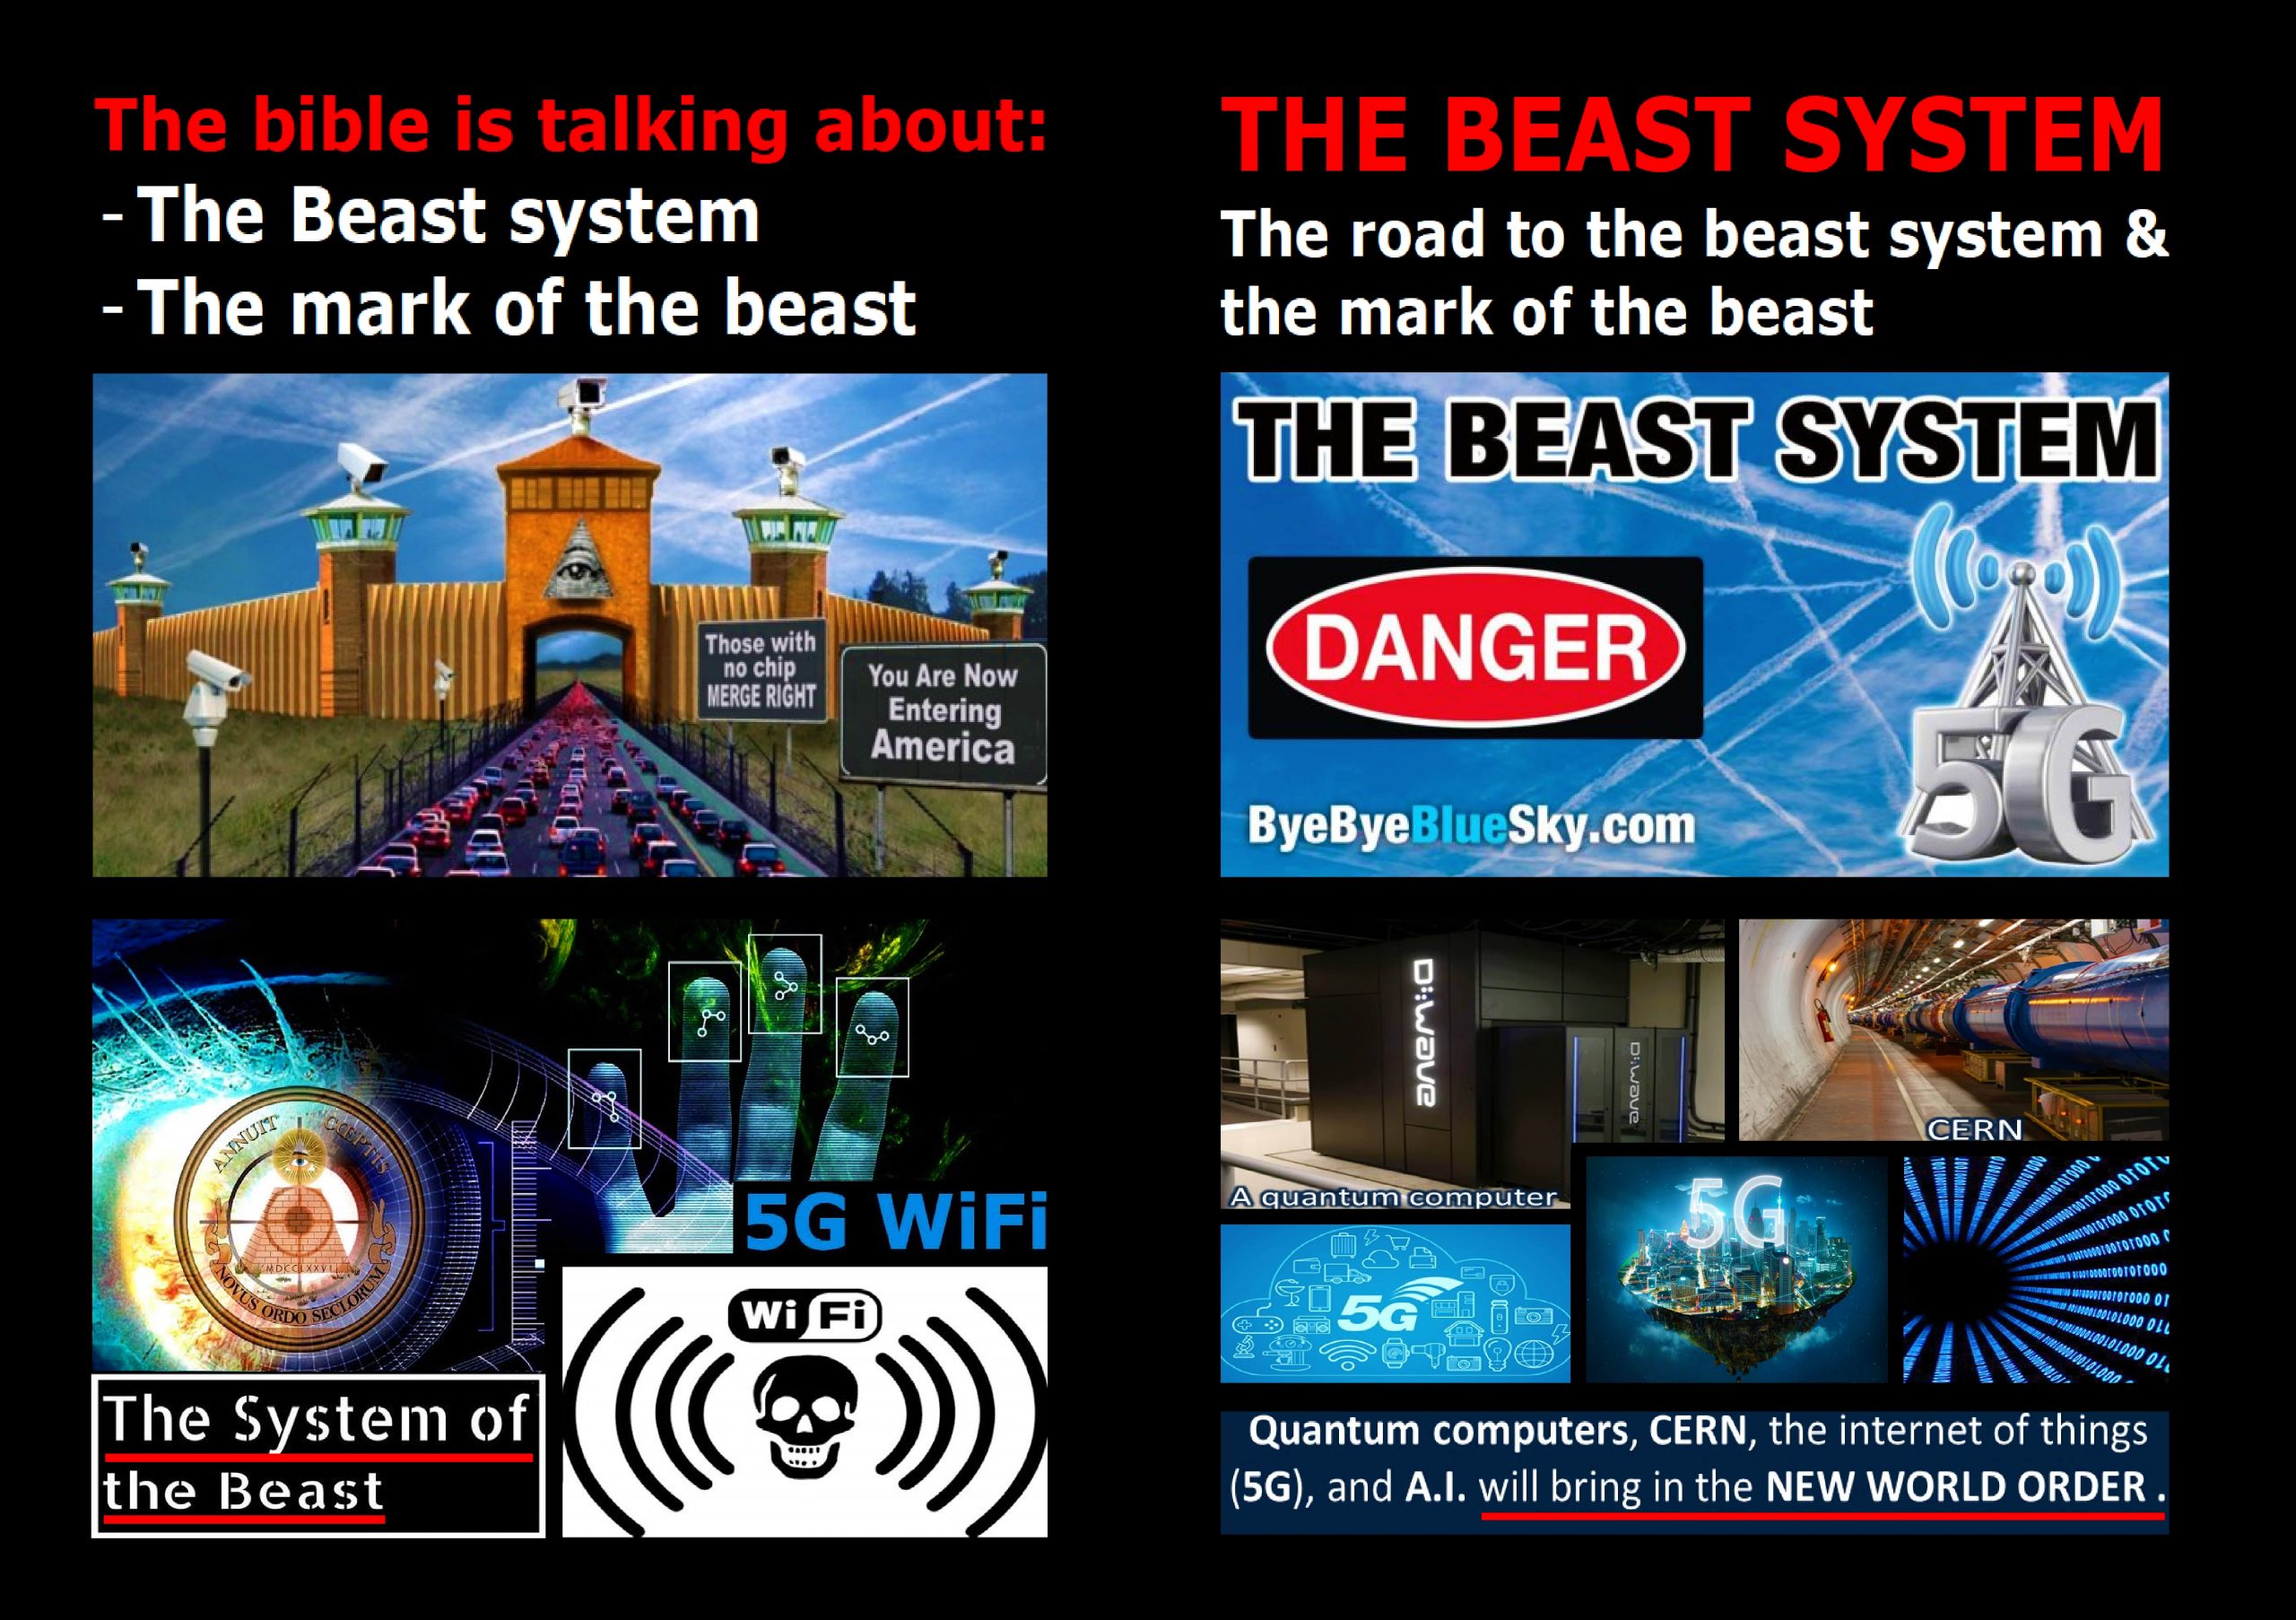 The Beast System